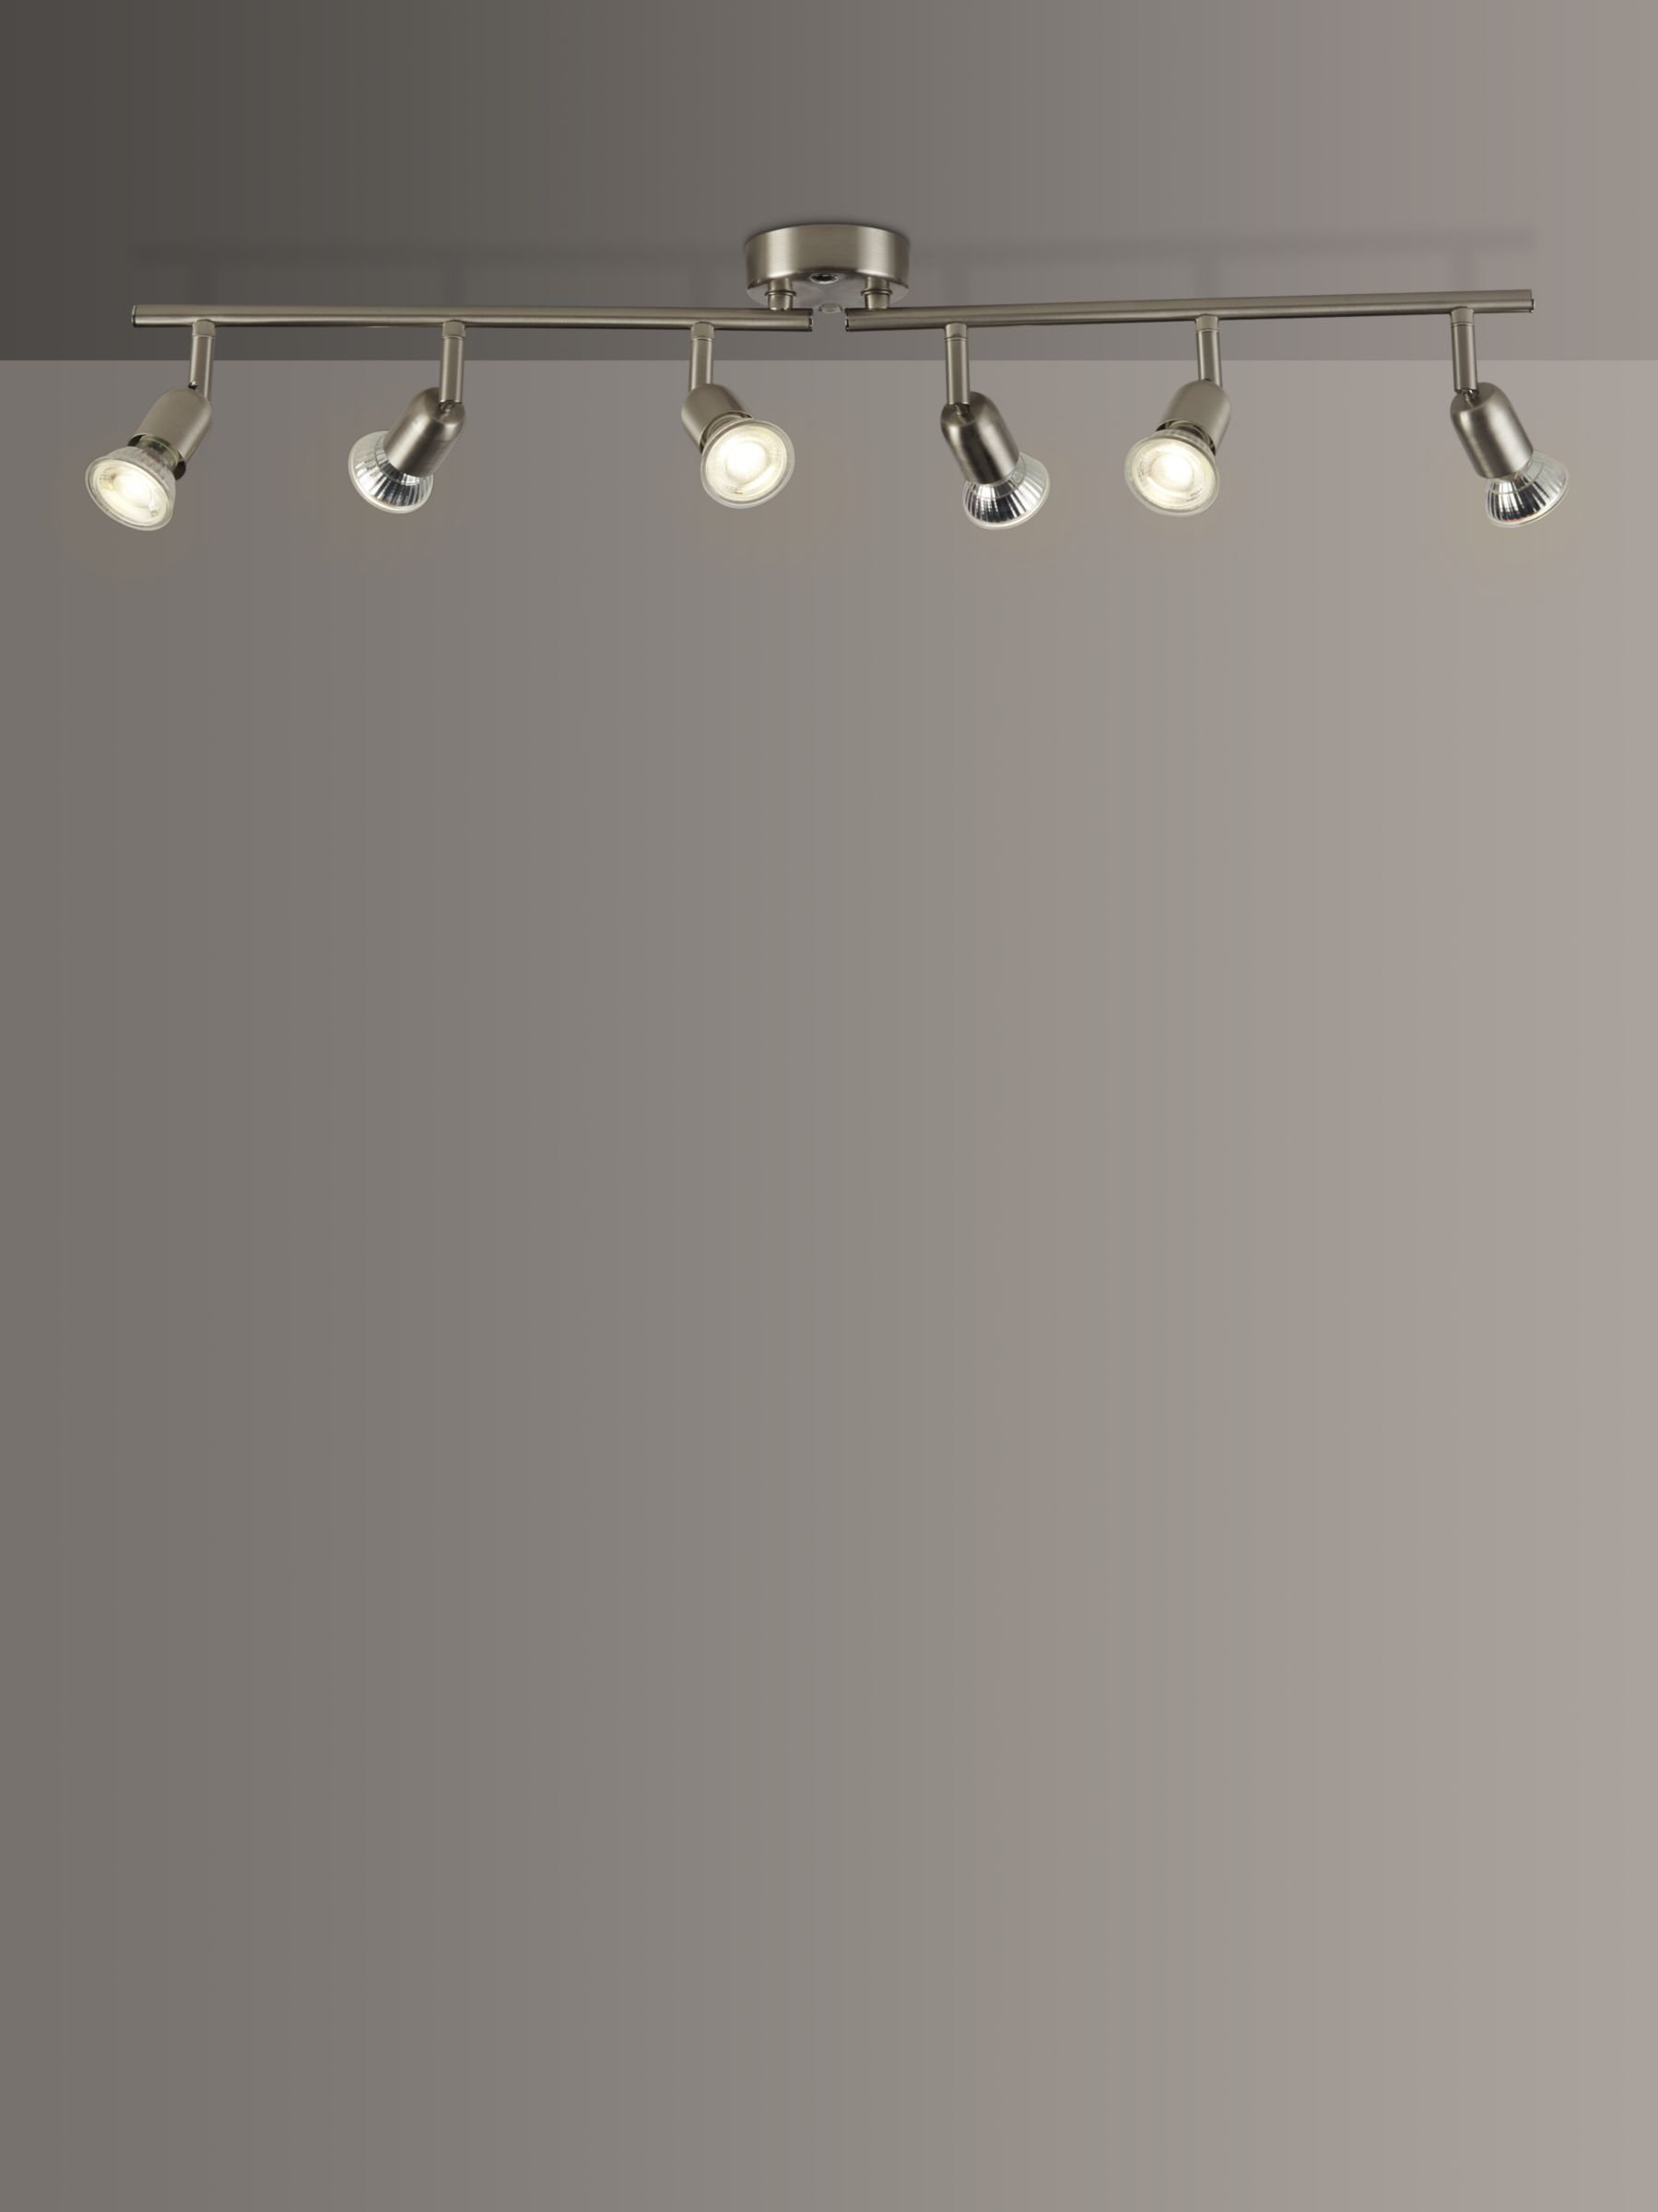 Photo of John lewis anyday keely 6 spotlight ceiling bar brushed steel